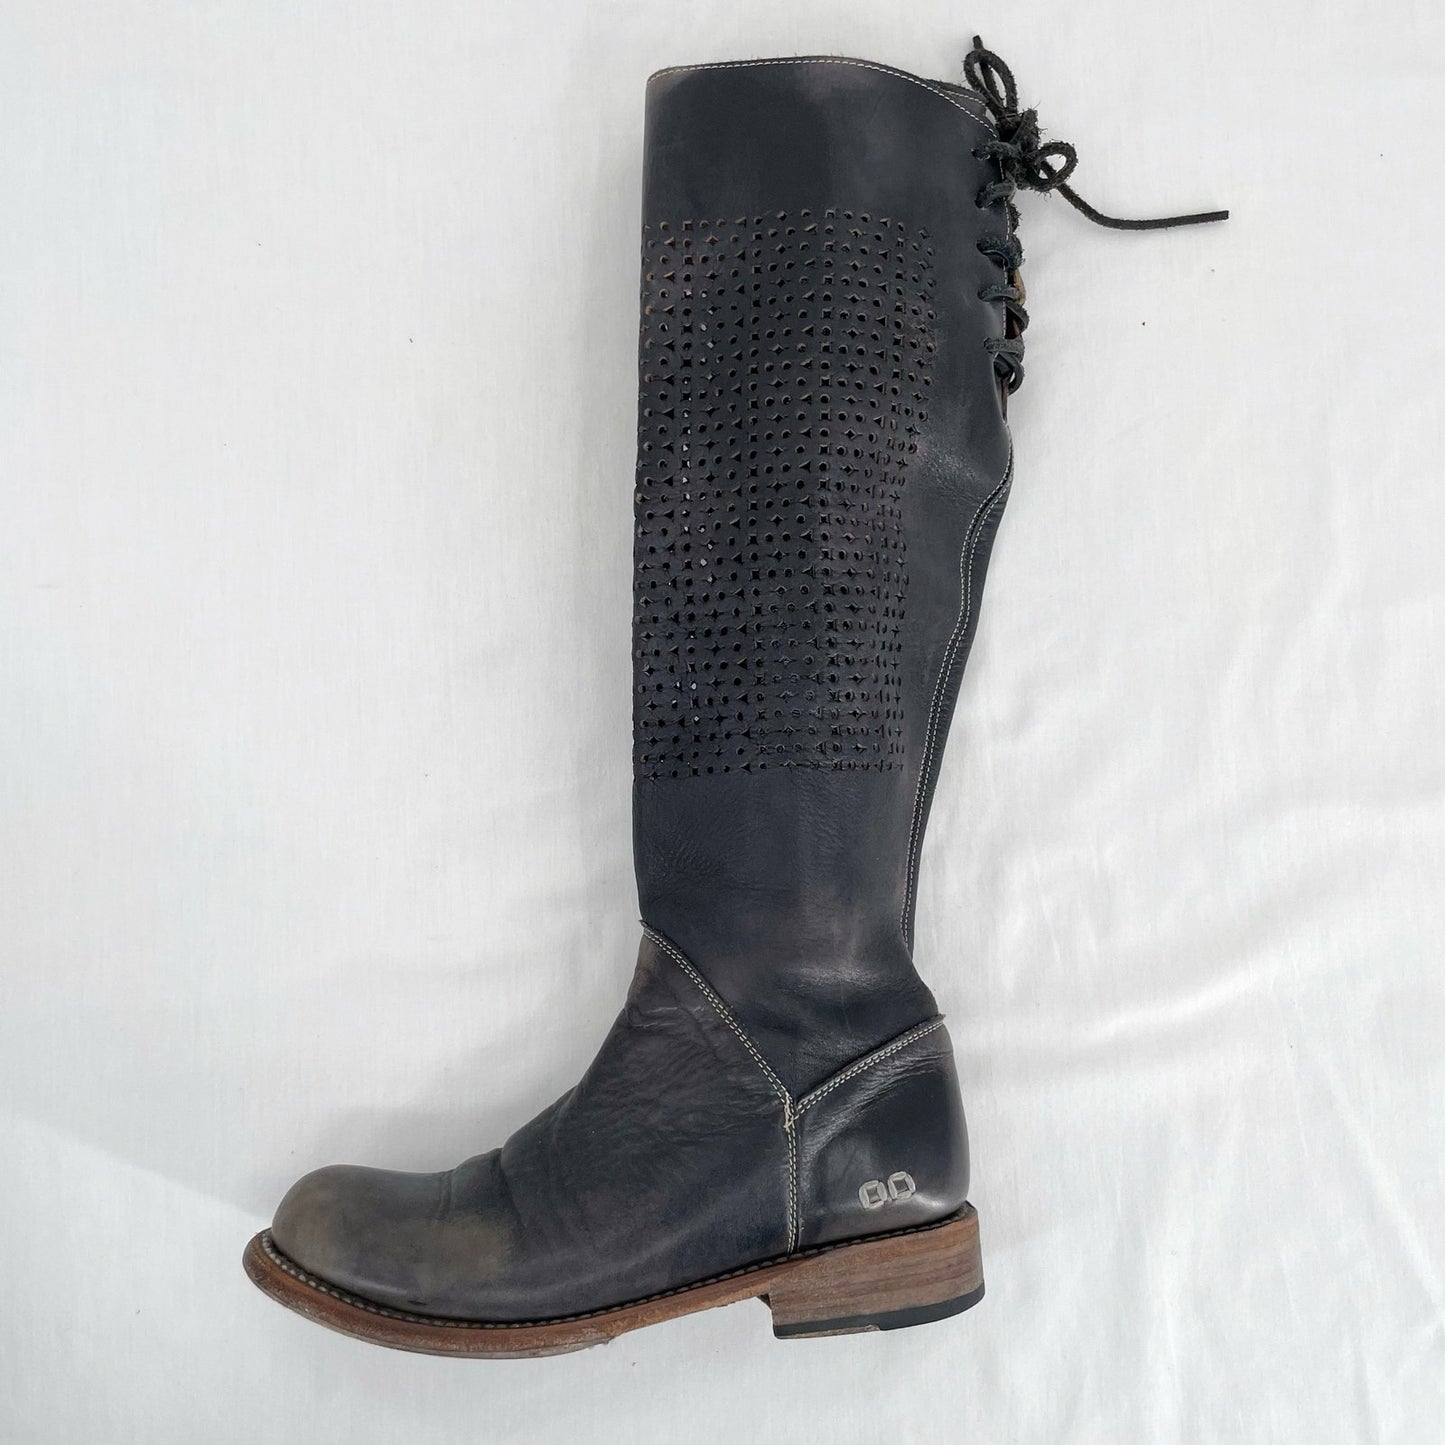 Bed|Stu Cambridge Boots Black Gray Cutout Perforated Tall Boho Shoes Size 7.5